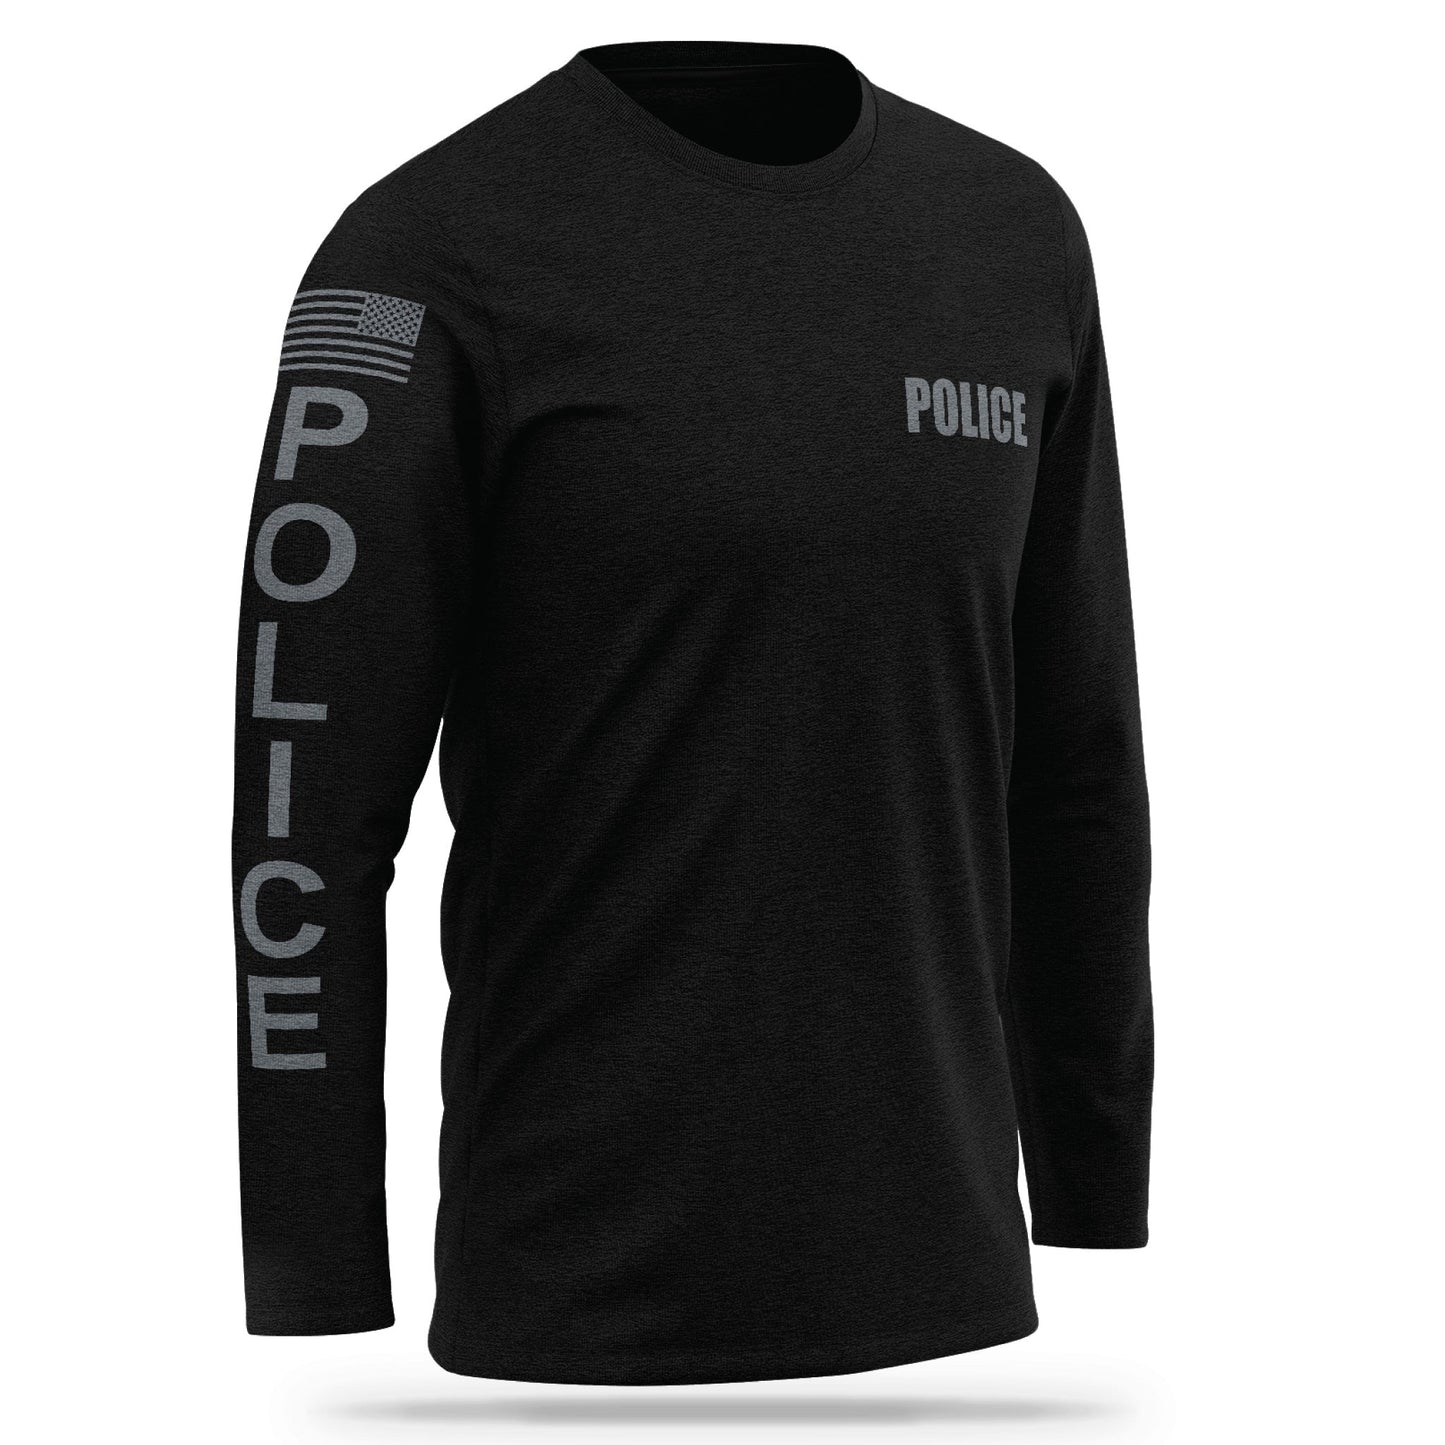 [POLICE] Cotton Blend Long Sleeve [BLK/GRY]-13 Fifty Apparel